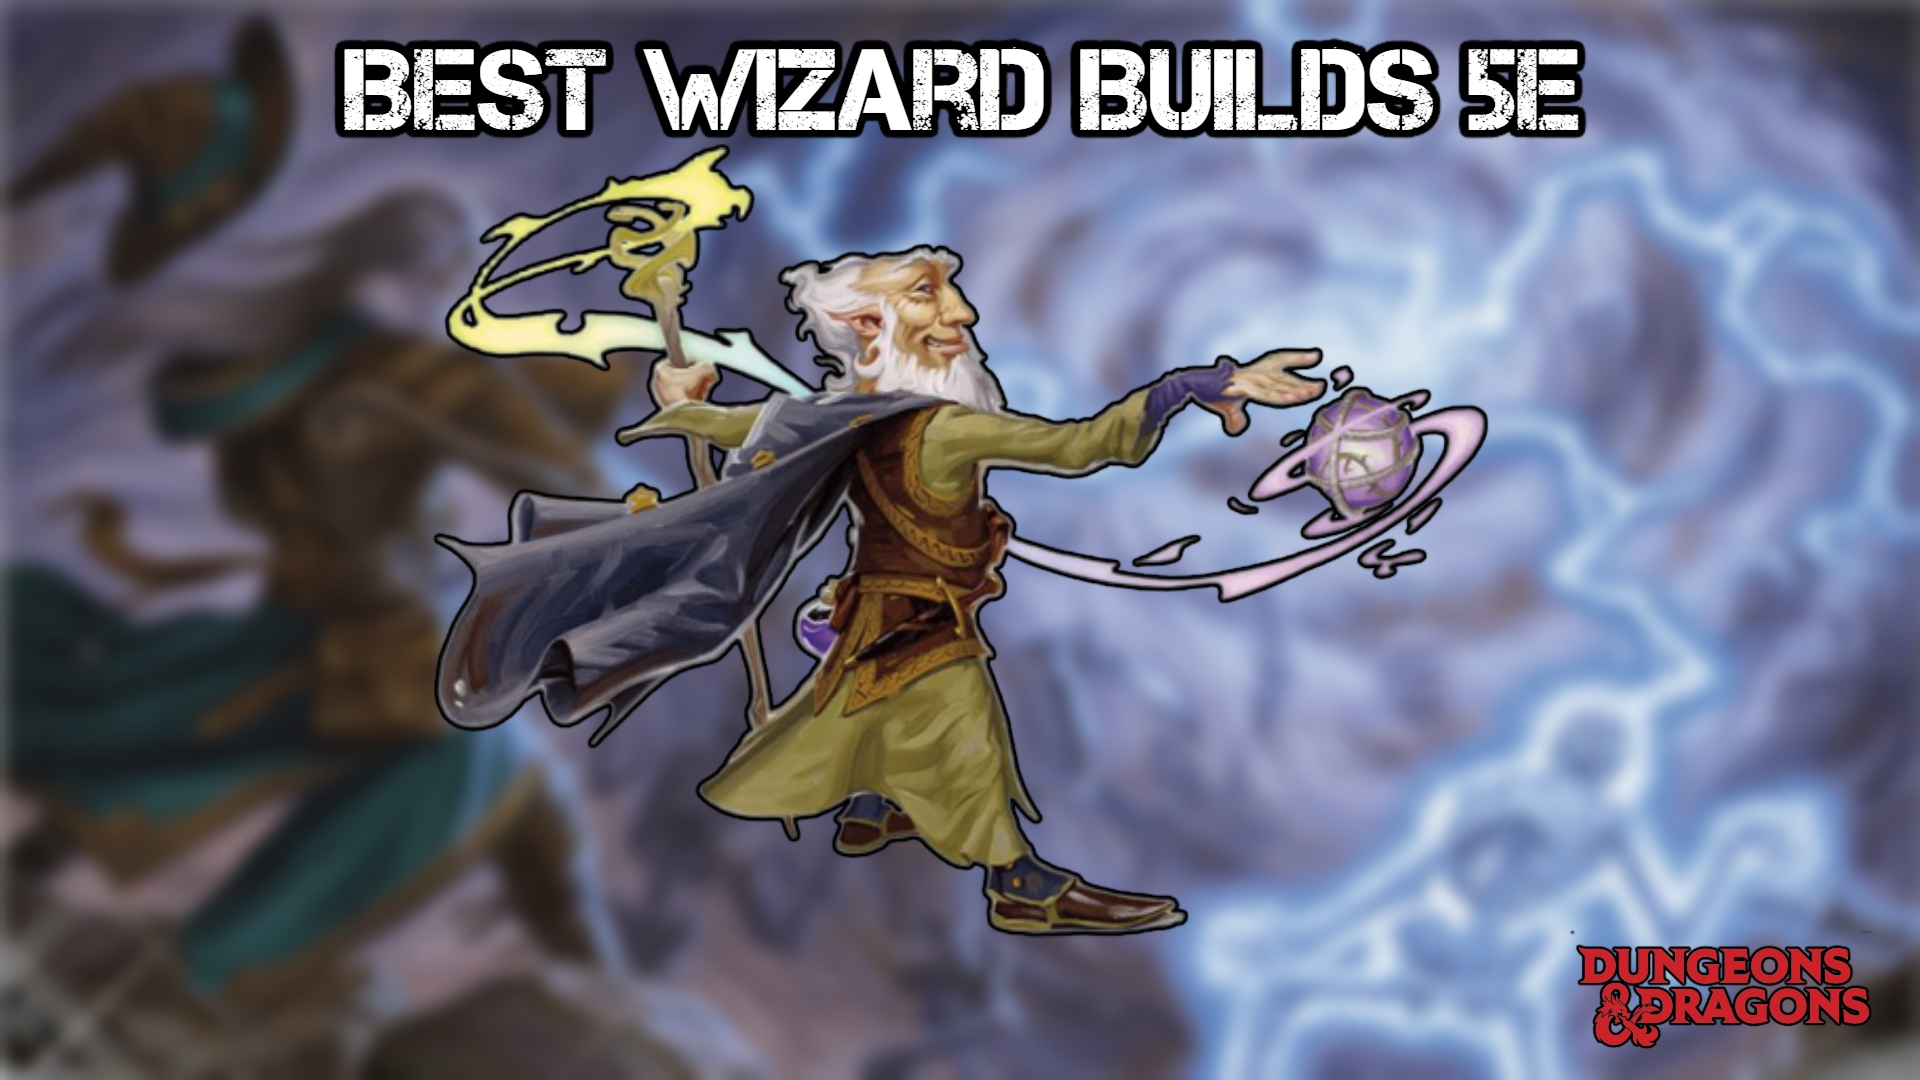 You are currently viewing Best Wizard Builds 5E In Dungeons & Dragons